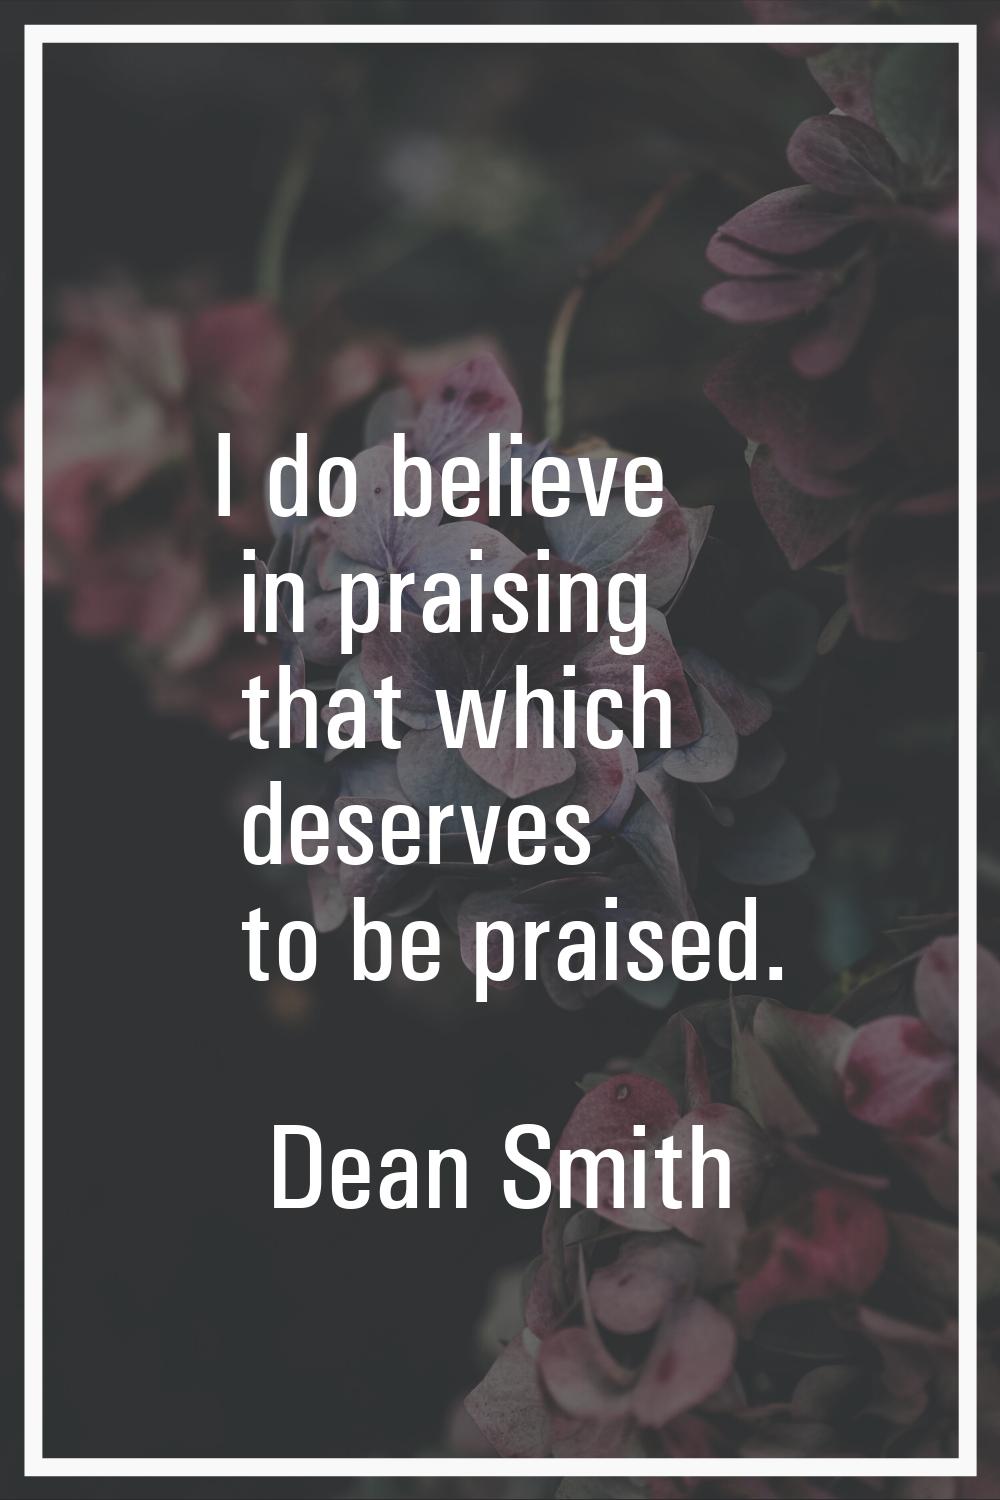 I do believe in praising that which deserves to be praised.